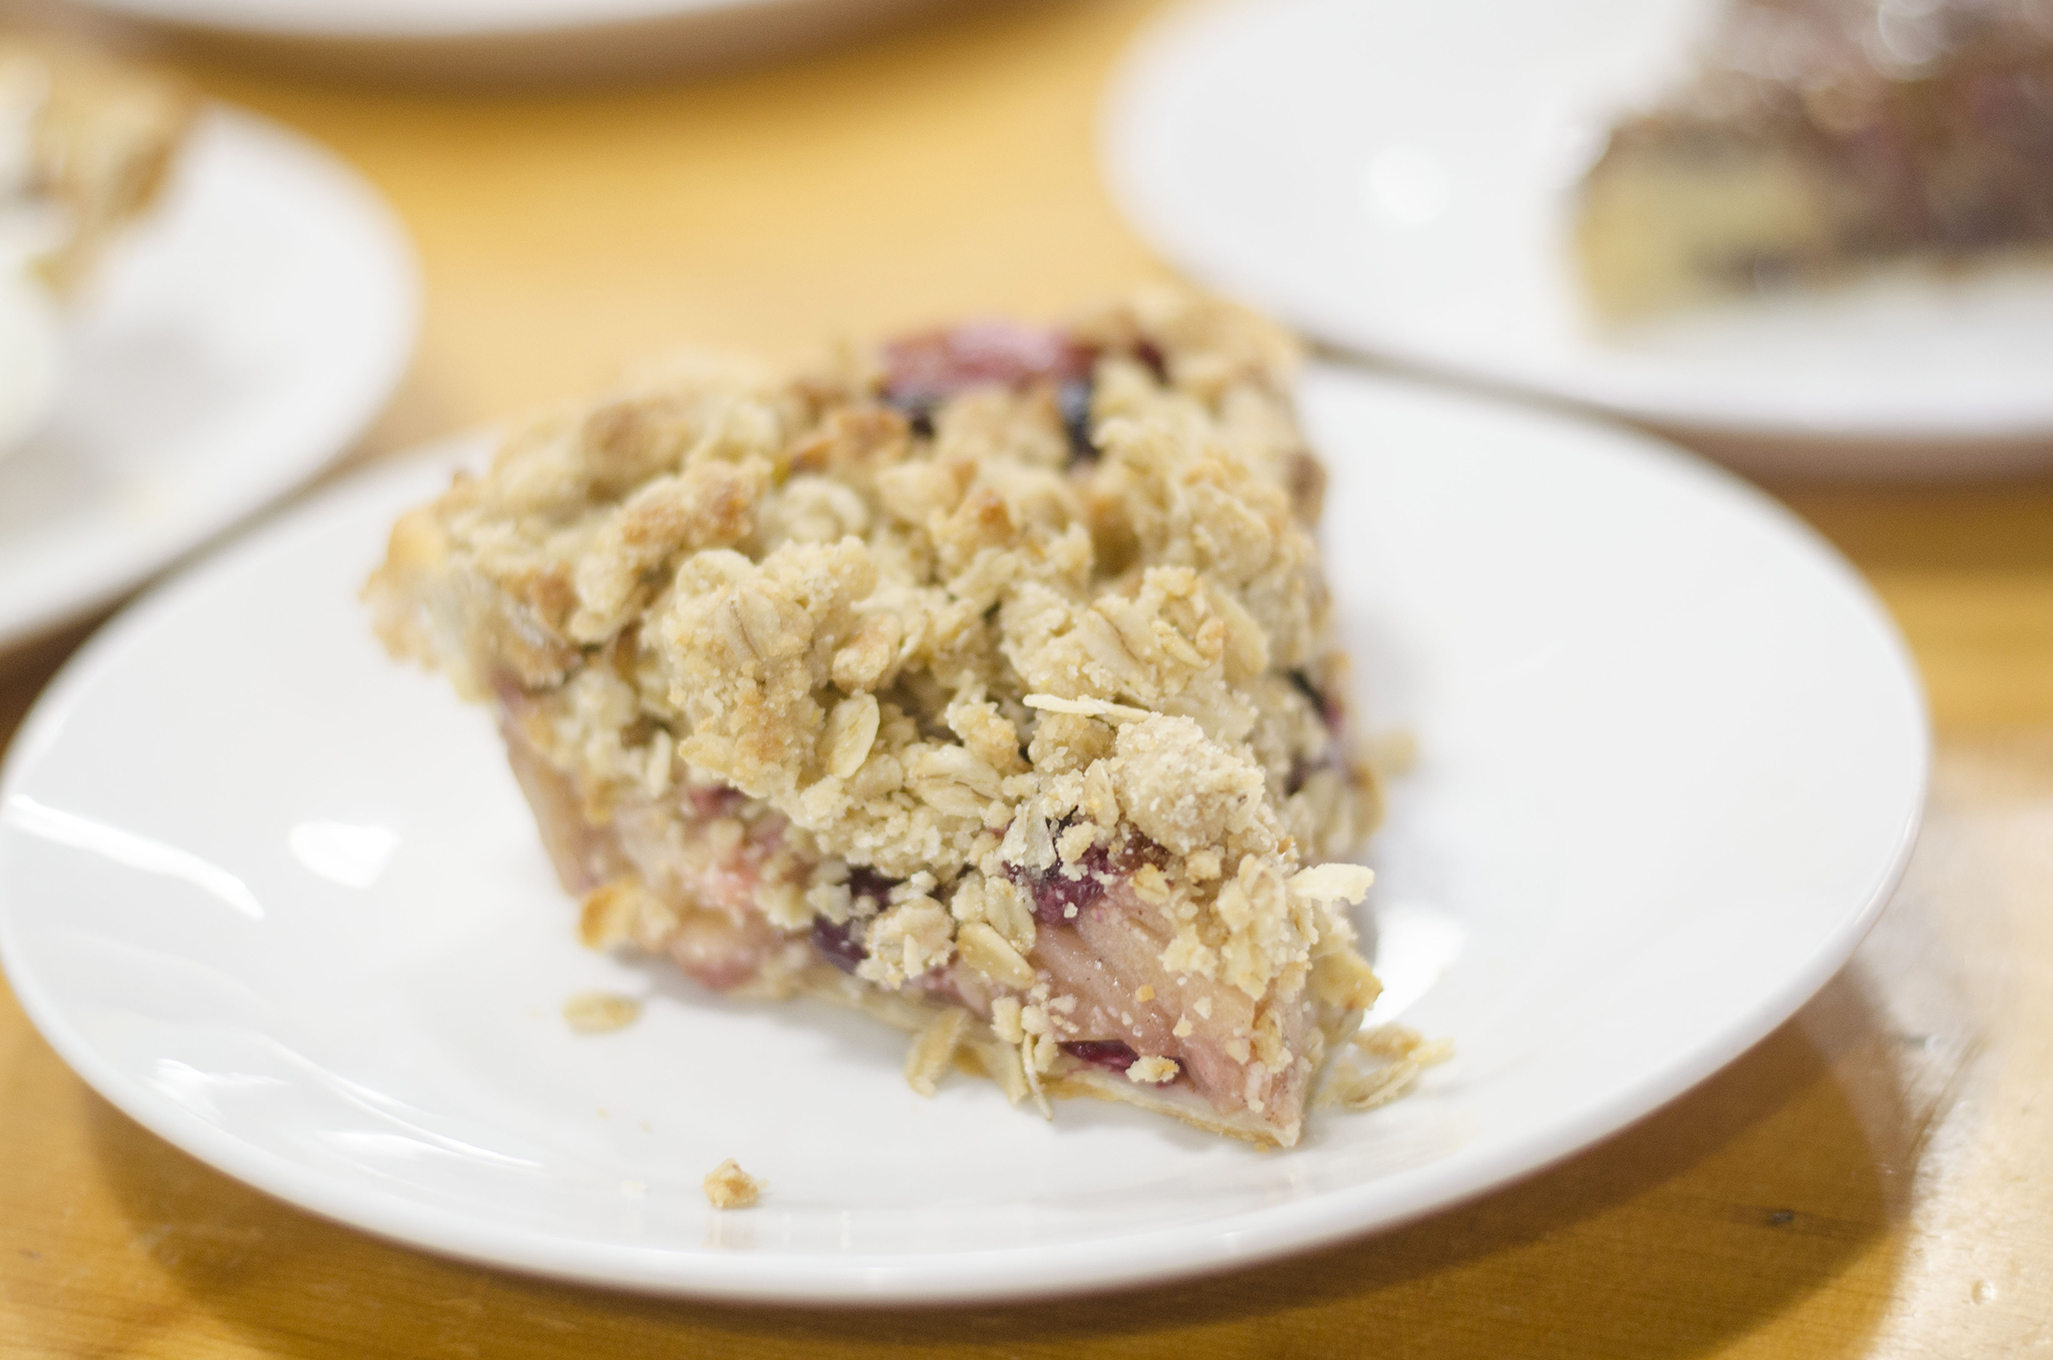 Apple Cranberry Crumble pie from Riverside Pie Cafe in Windsor, Ontario.